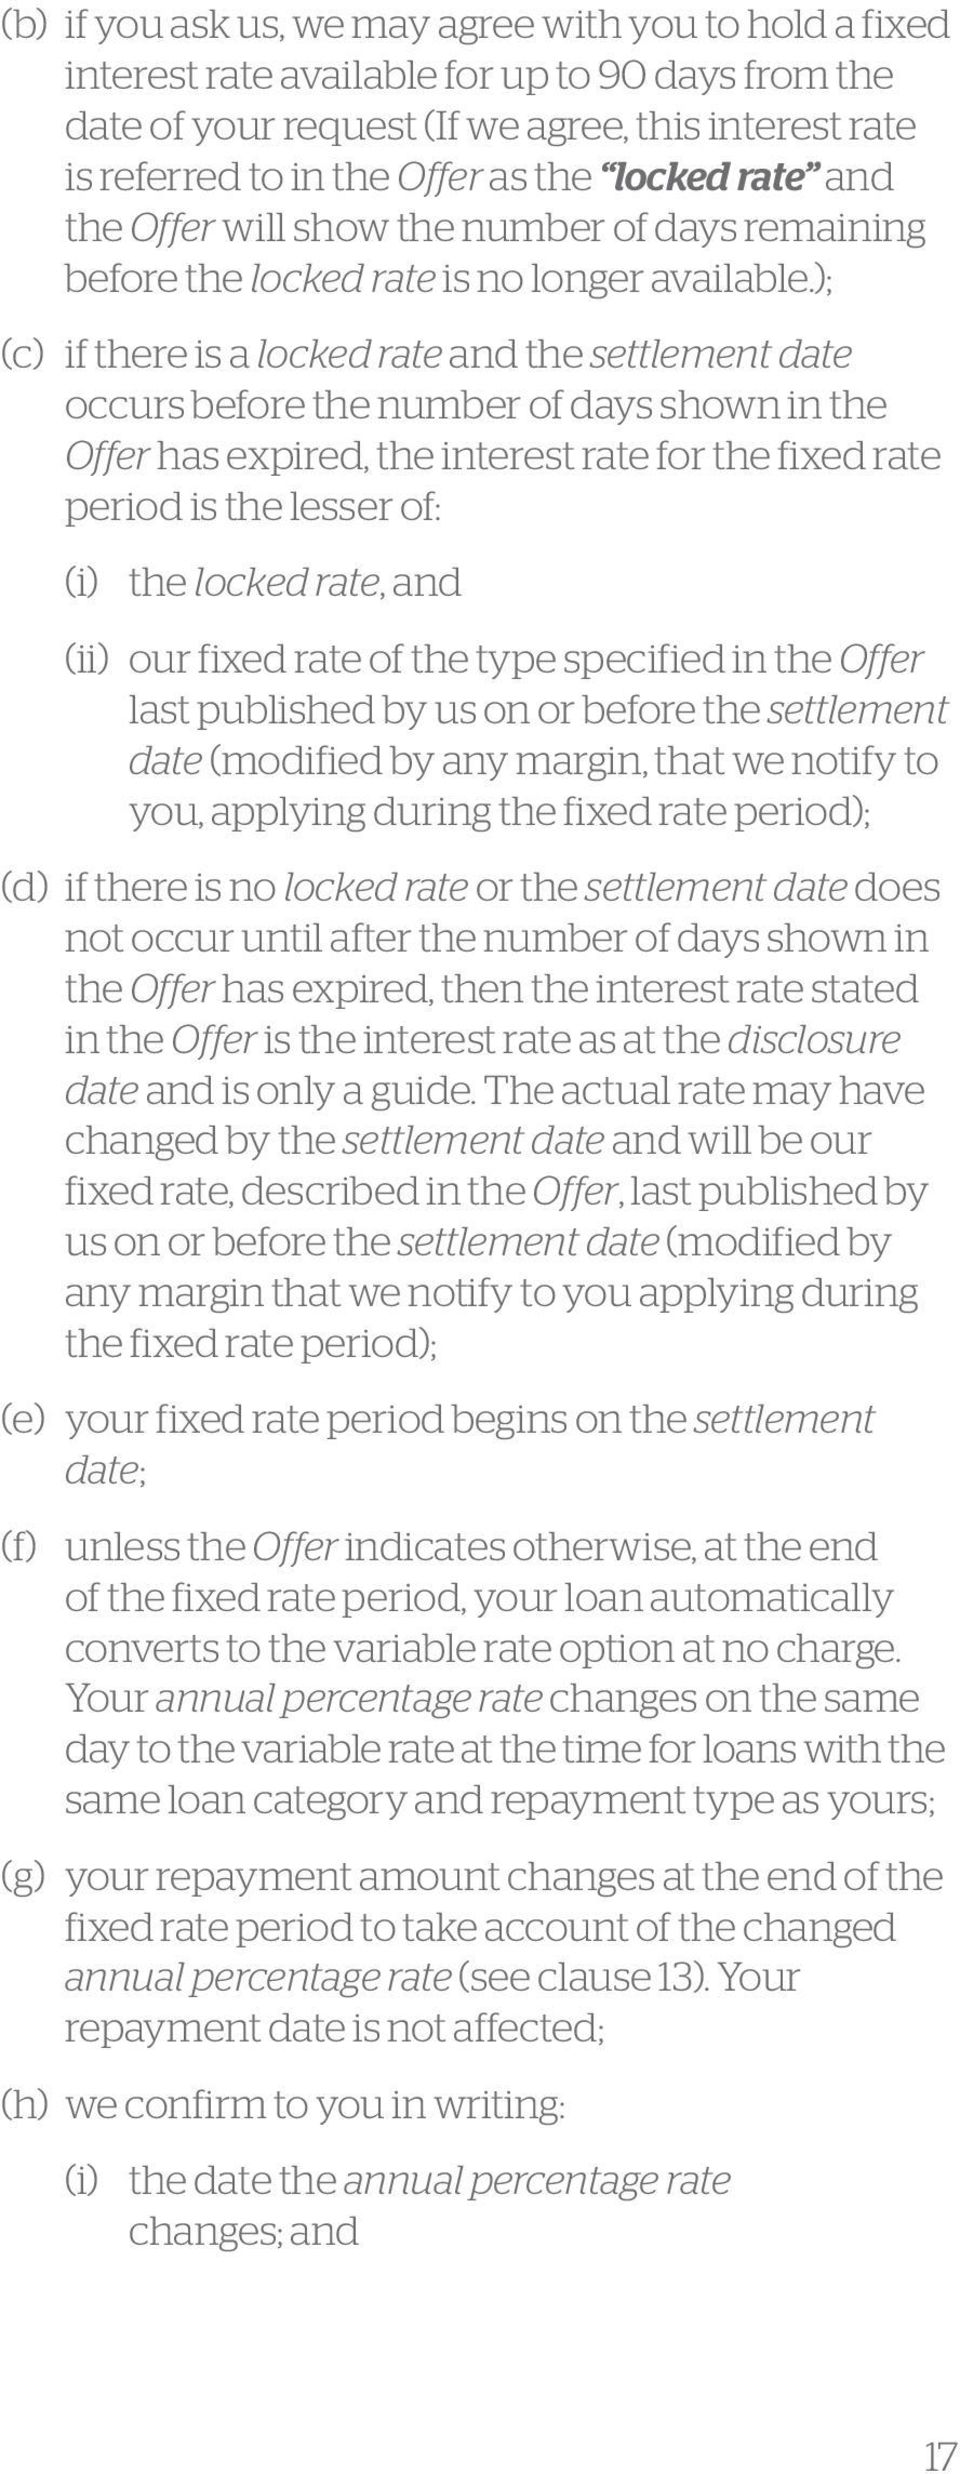 ); (c) if there is a locked rate and the settlement date occurs before the number of days shown in the Offer has expired, the interest rate for the fixed rate period is the lesser of: (i) the locked